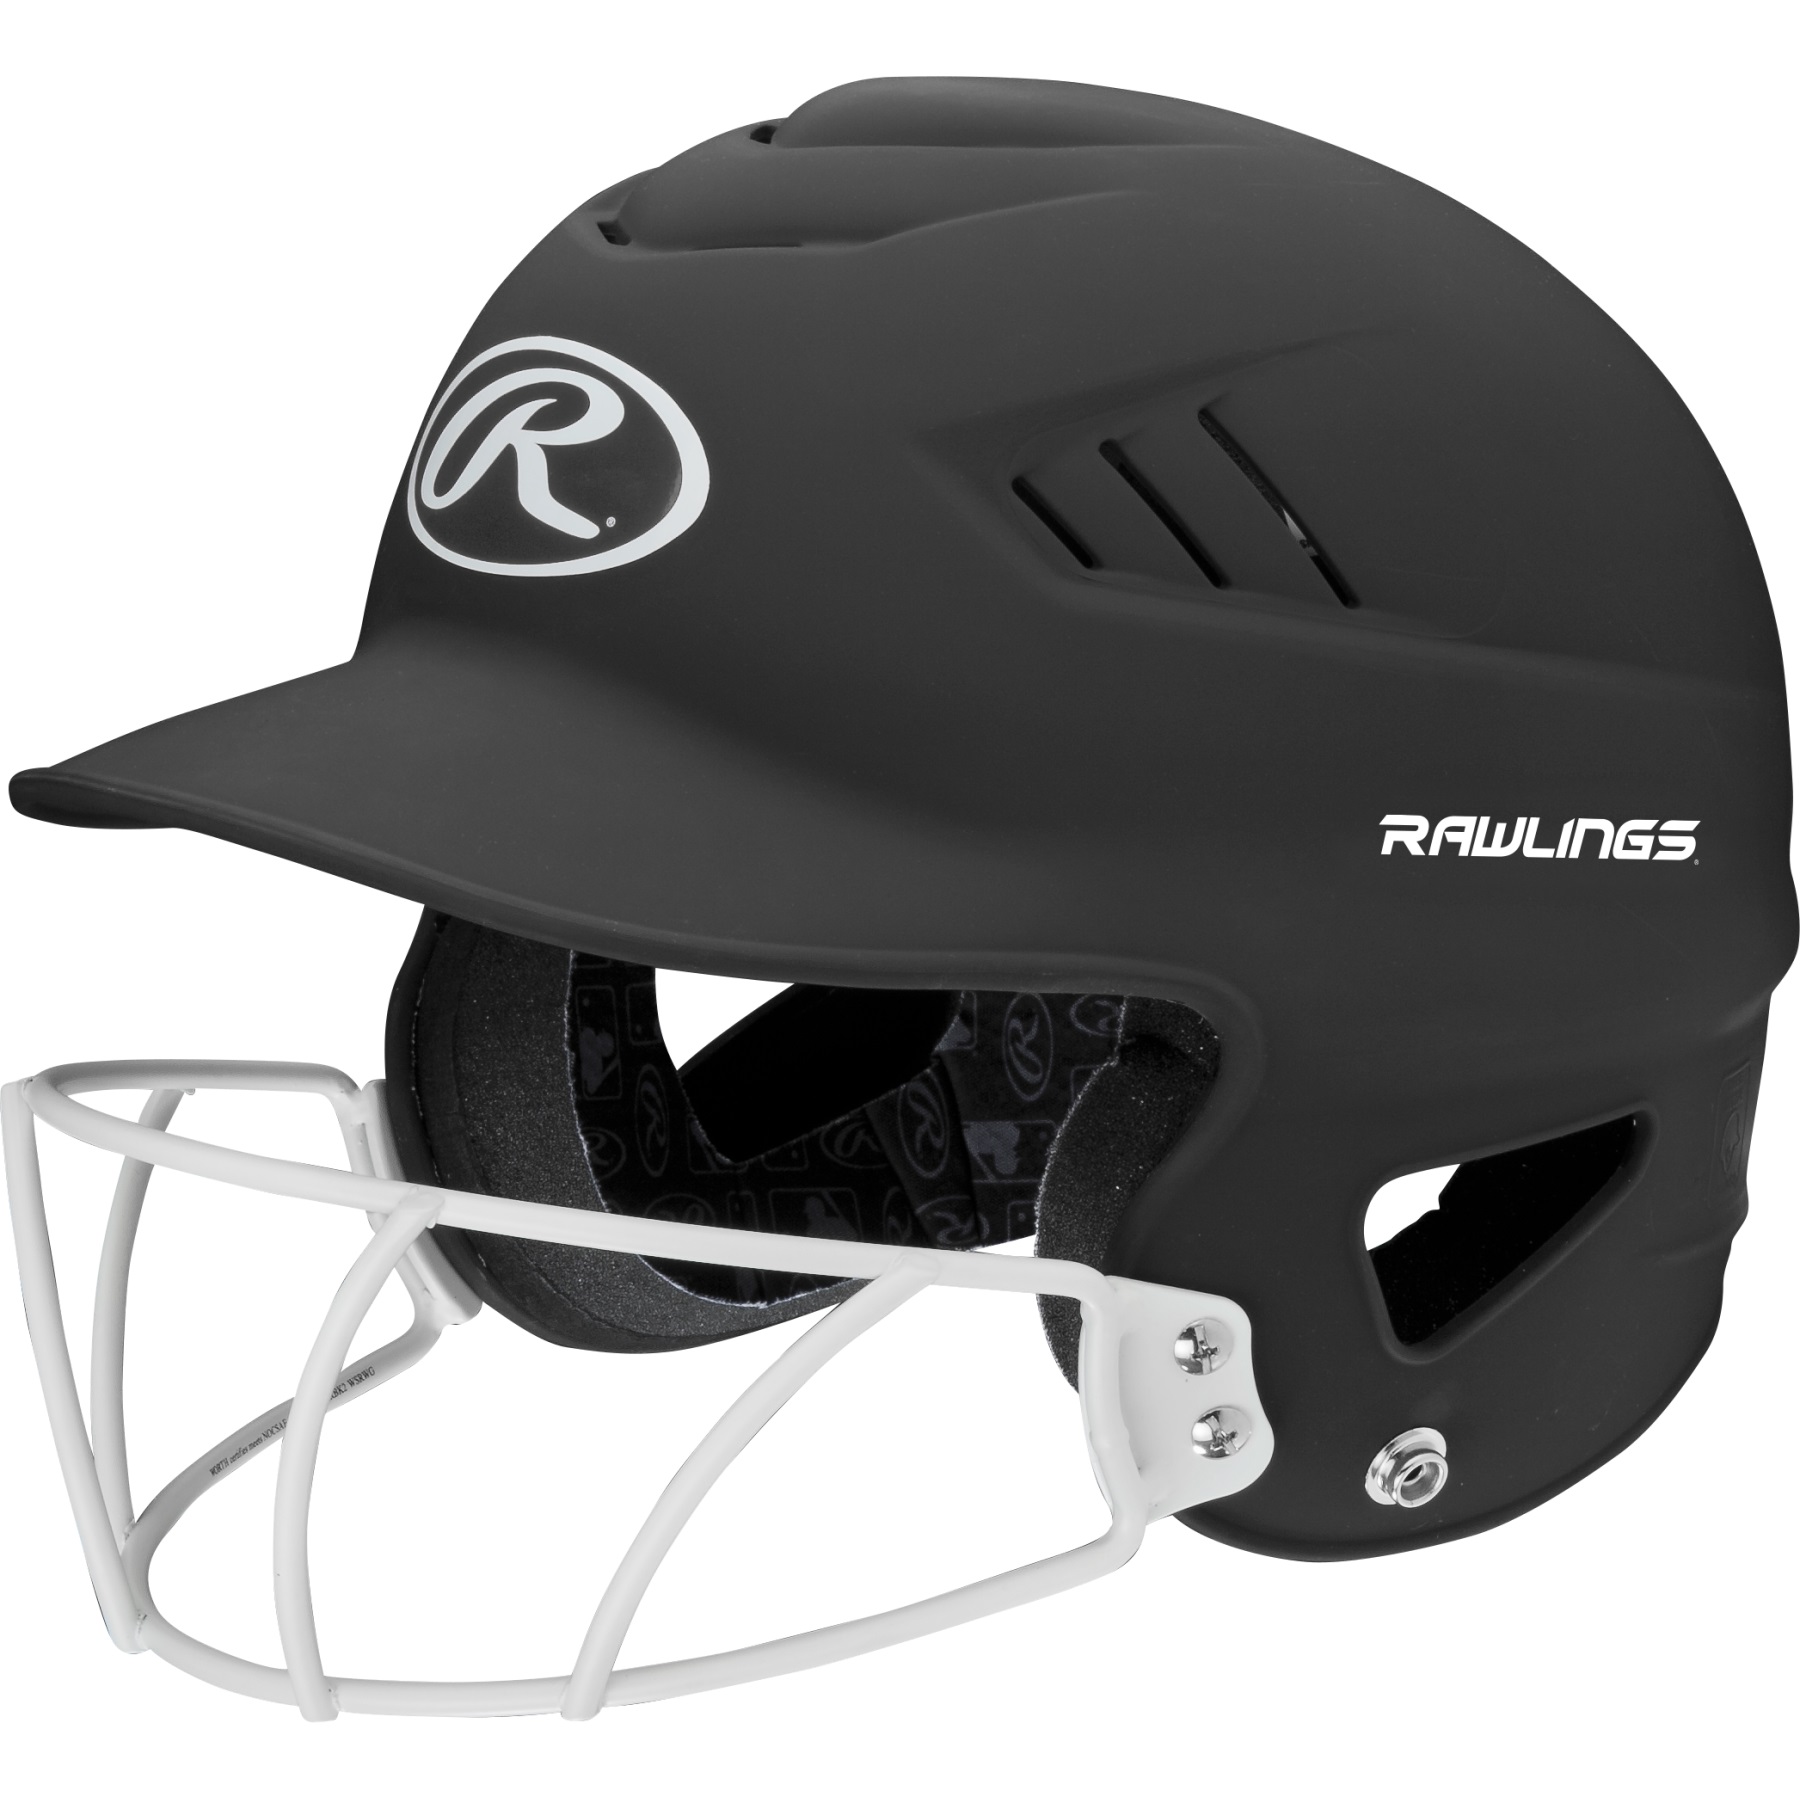 Rawlings Highlighter Batting Helmet with face guard